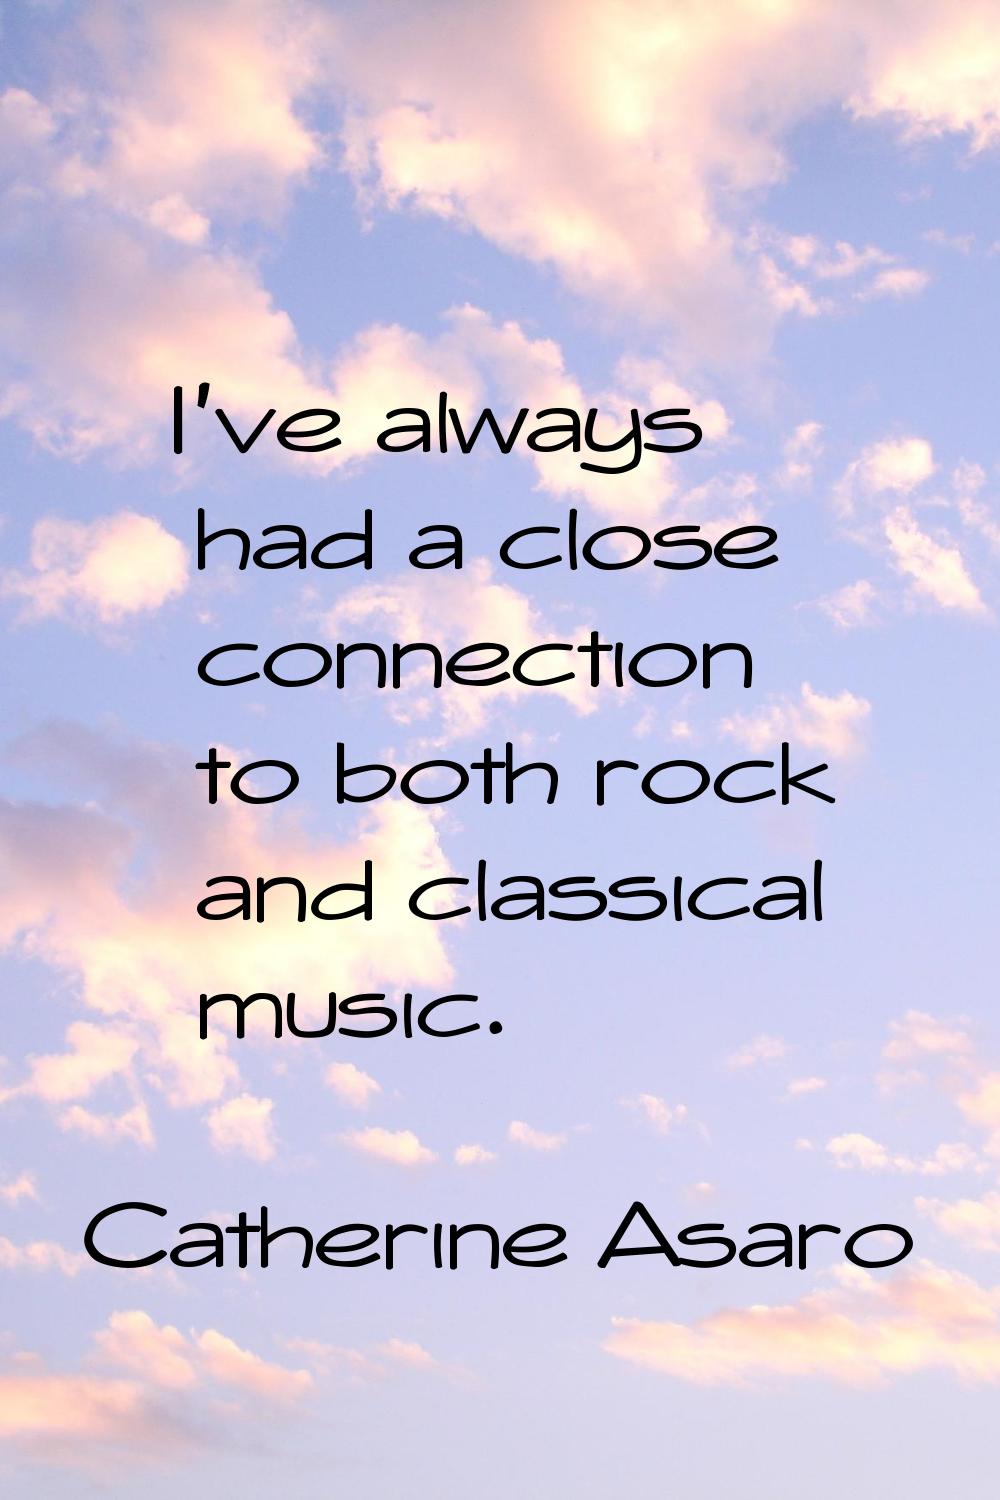 I've always had a close connection to both rock and classical music.